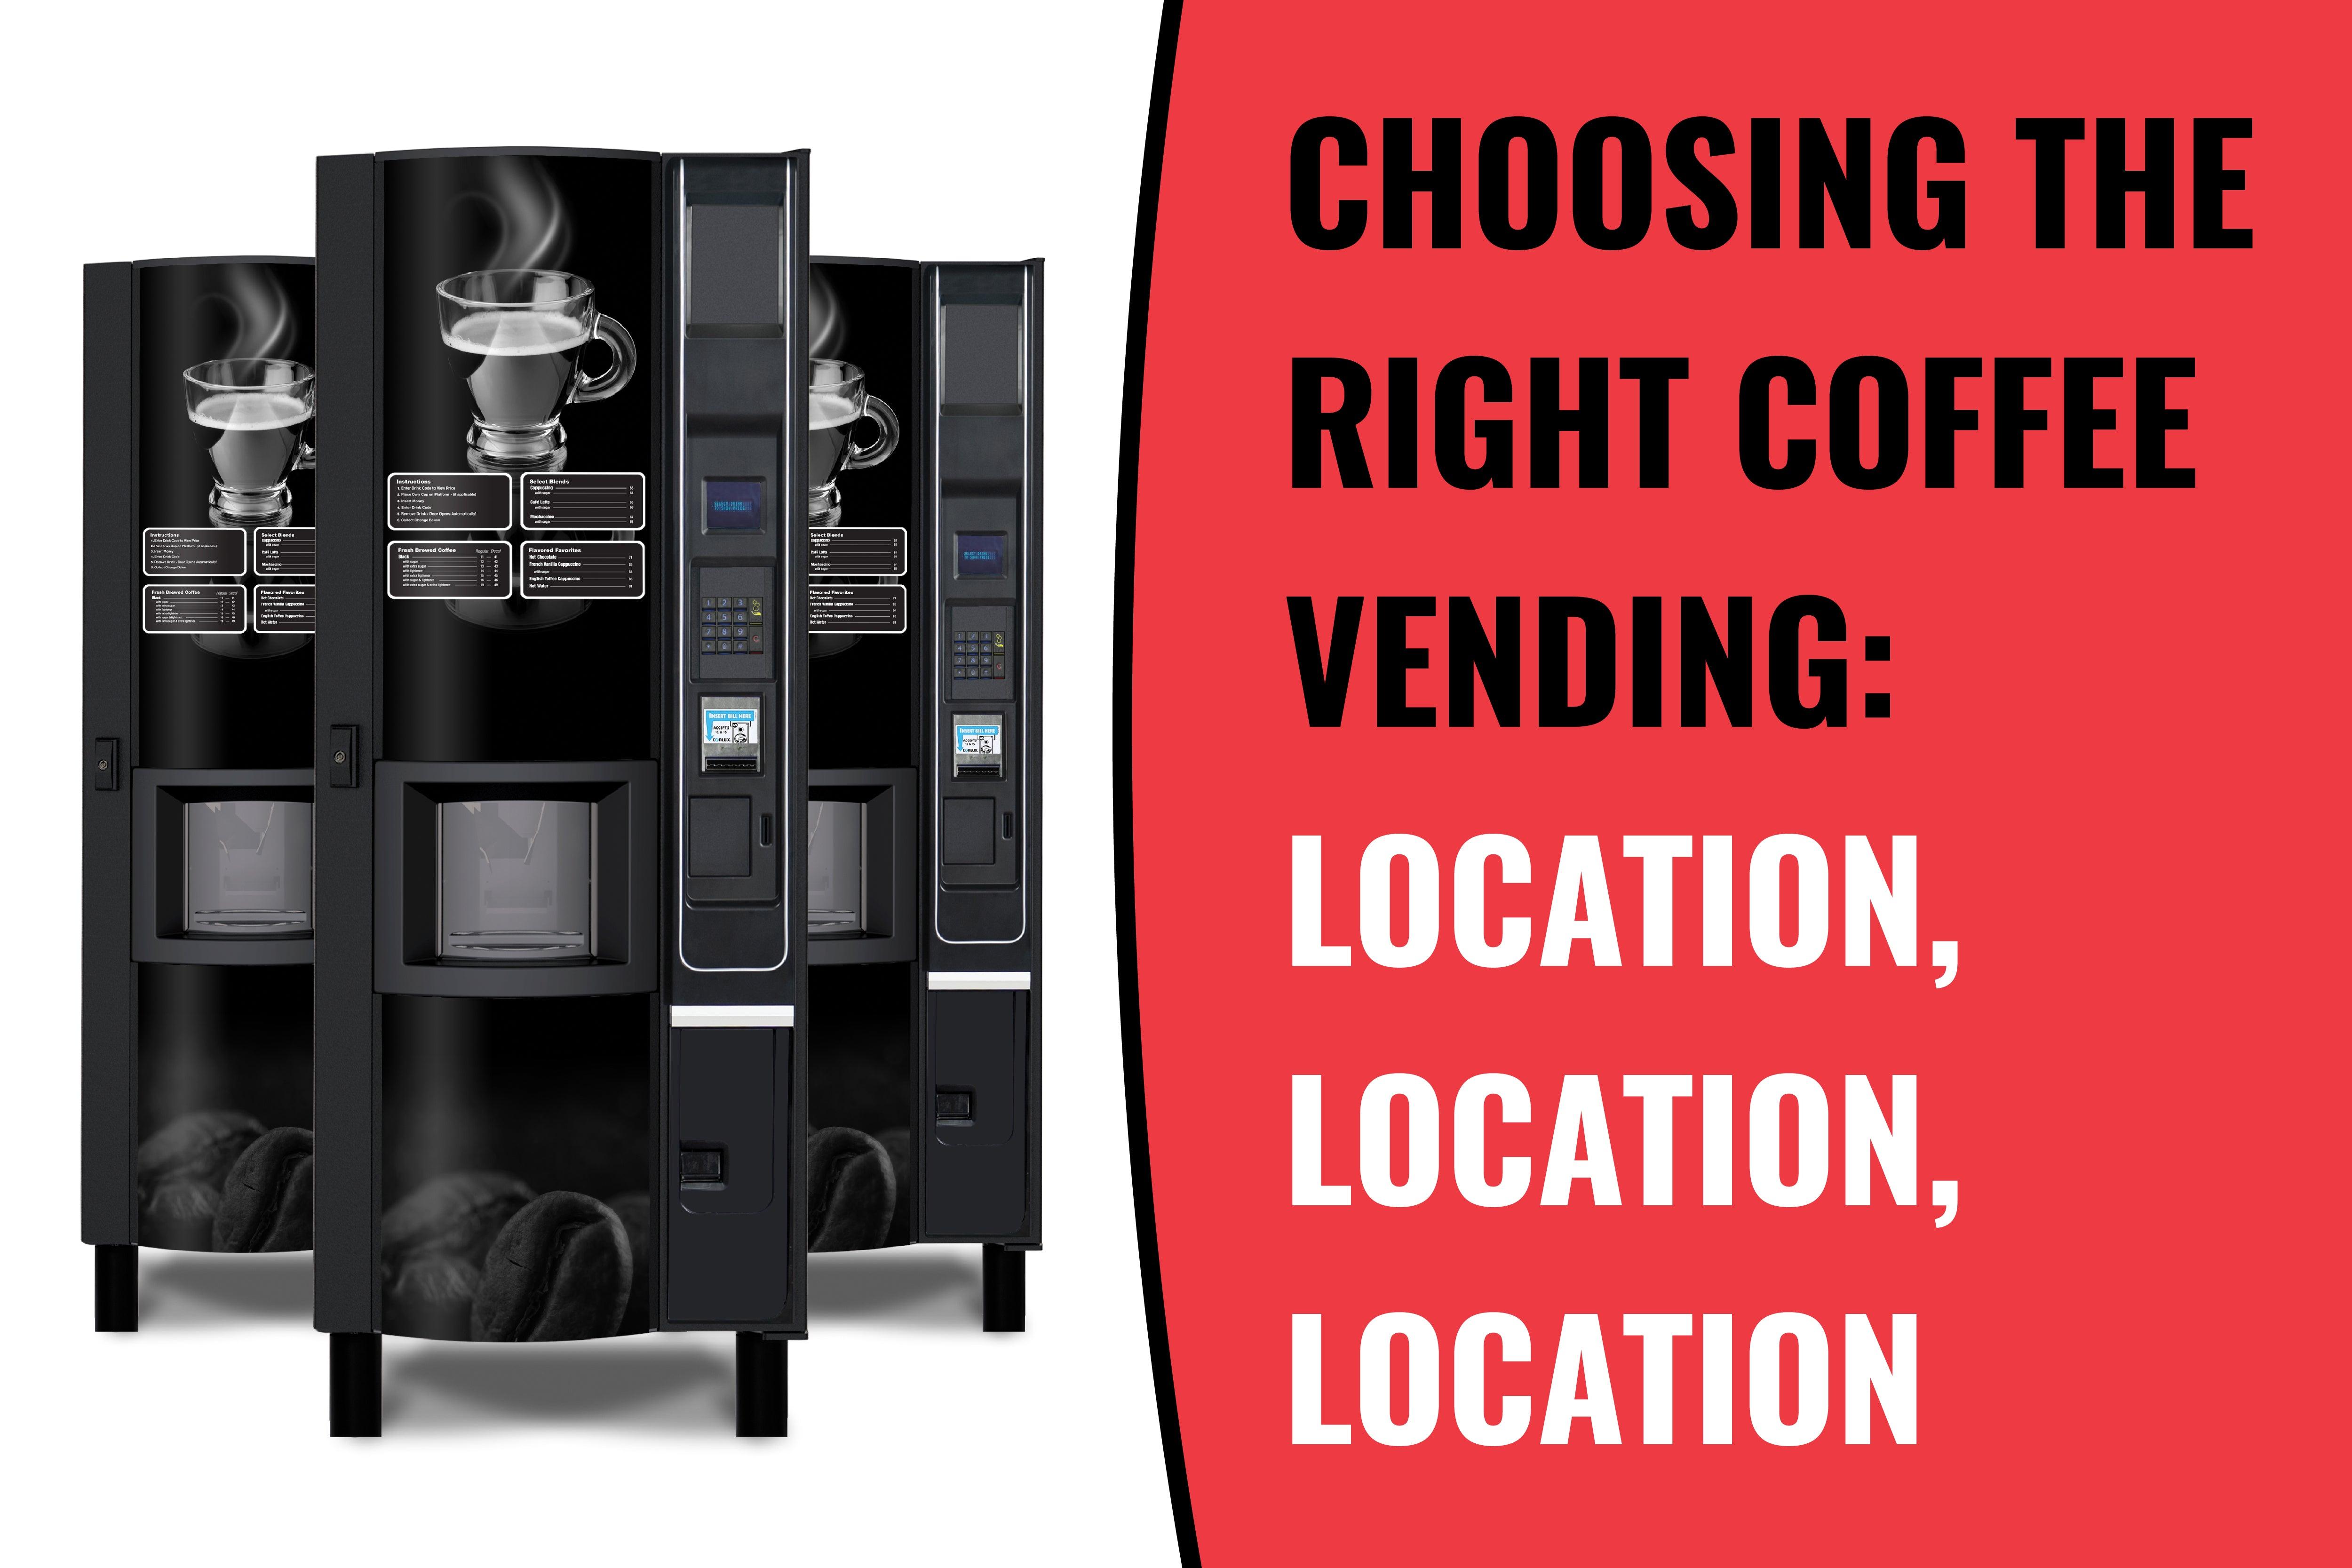 Hot Beverage Vending: Choosing the Right Coffee Vending: Location, Location, Location - Vendnet